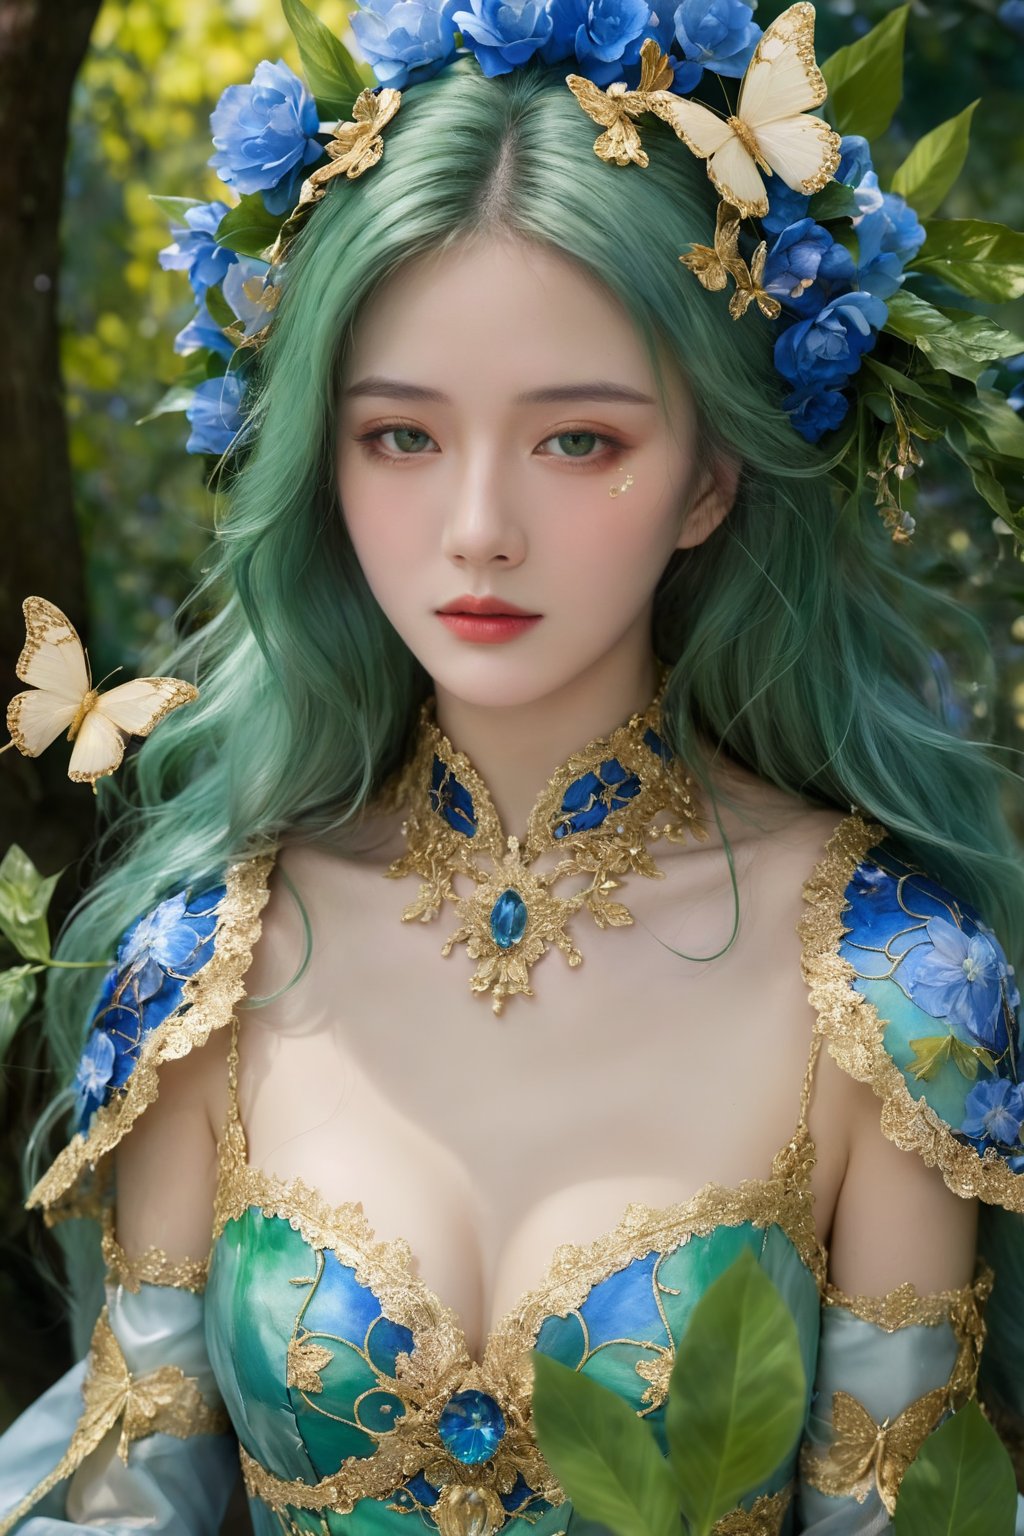 splash art, digital painting, alcohol ink painting, luminism, golden lines, BjD doll face, porcelain skin, baroque, long swirling green hair, lavish green leaves, falling blue flowers, celestial lighting, butterflies, tree branches, sky, golden glowing, water drops,

best quality, masterpiece, high res, absurd res,
perfect lighting, vibrant colors, intricate details,
high detailed skin, pale skin,
,HUBGGIRL, HUBG_Mecha_Armor,hubg_mecha_girl,hubggirl